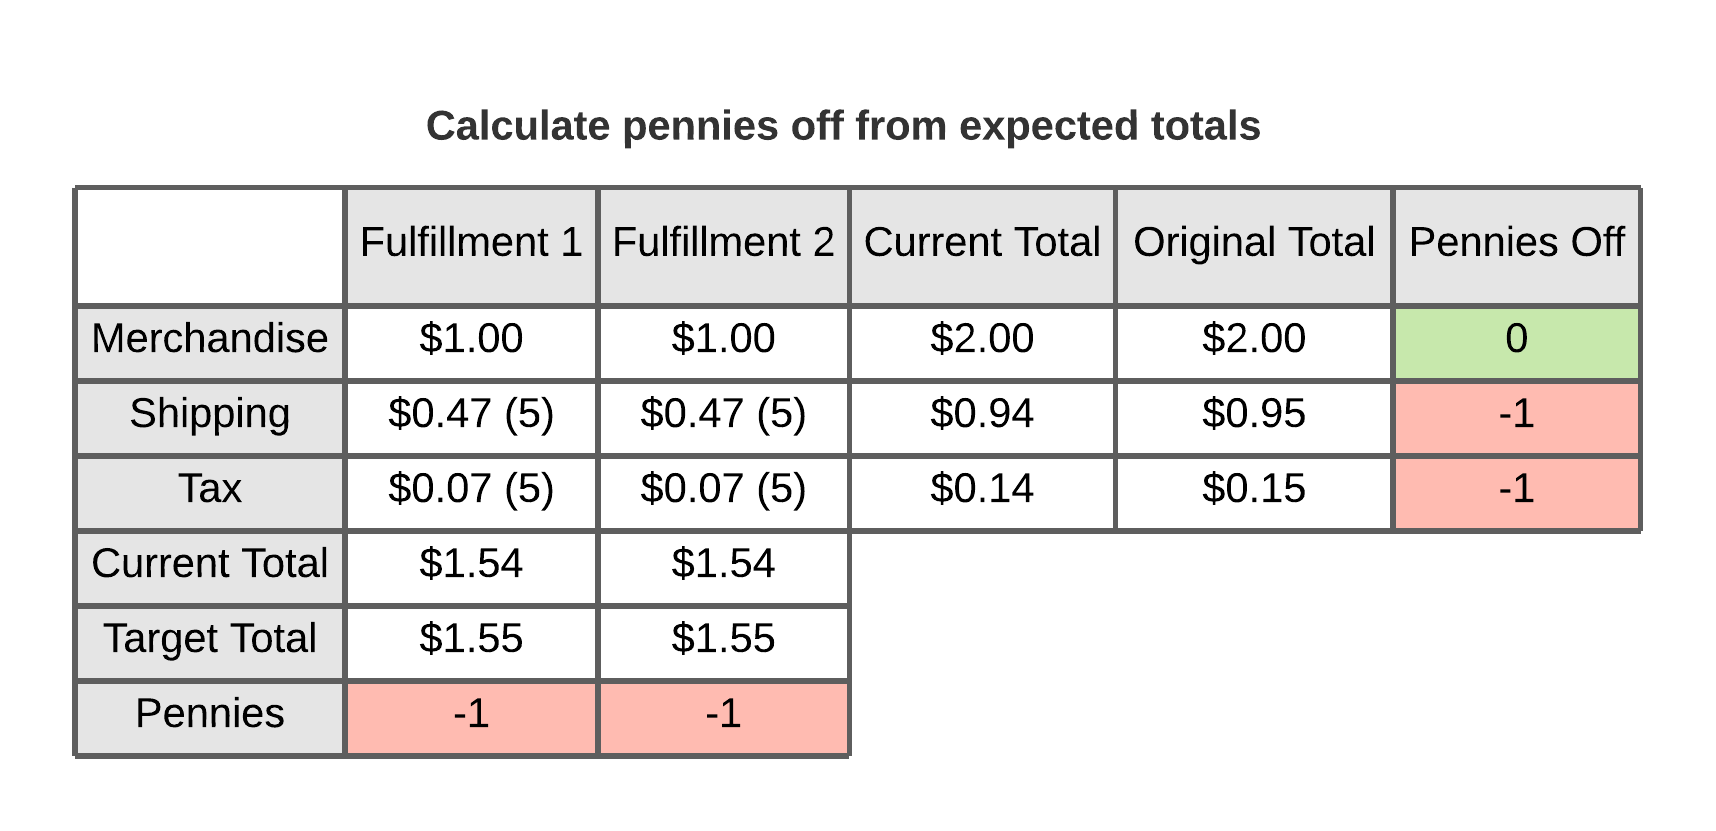 Calculate pennies off from expected totals